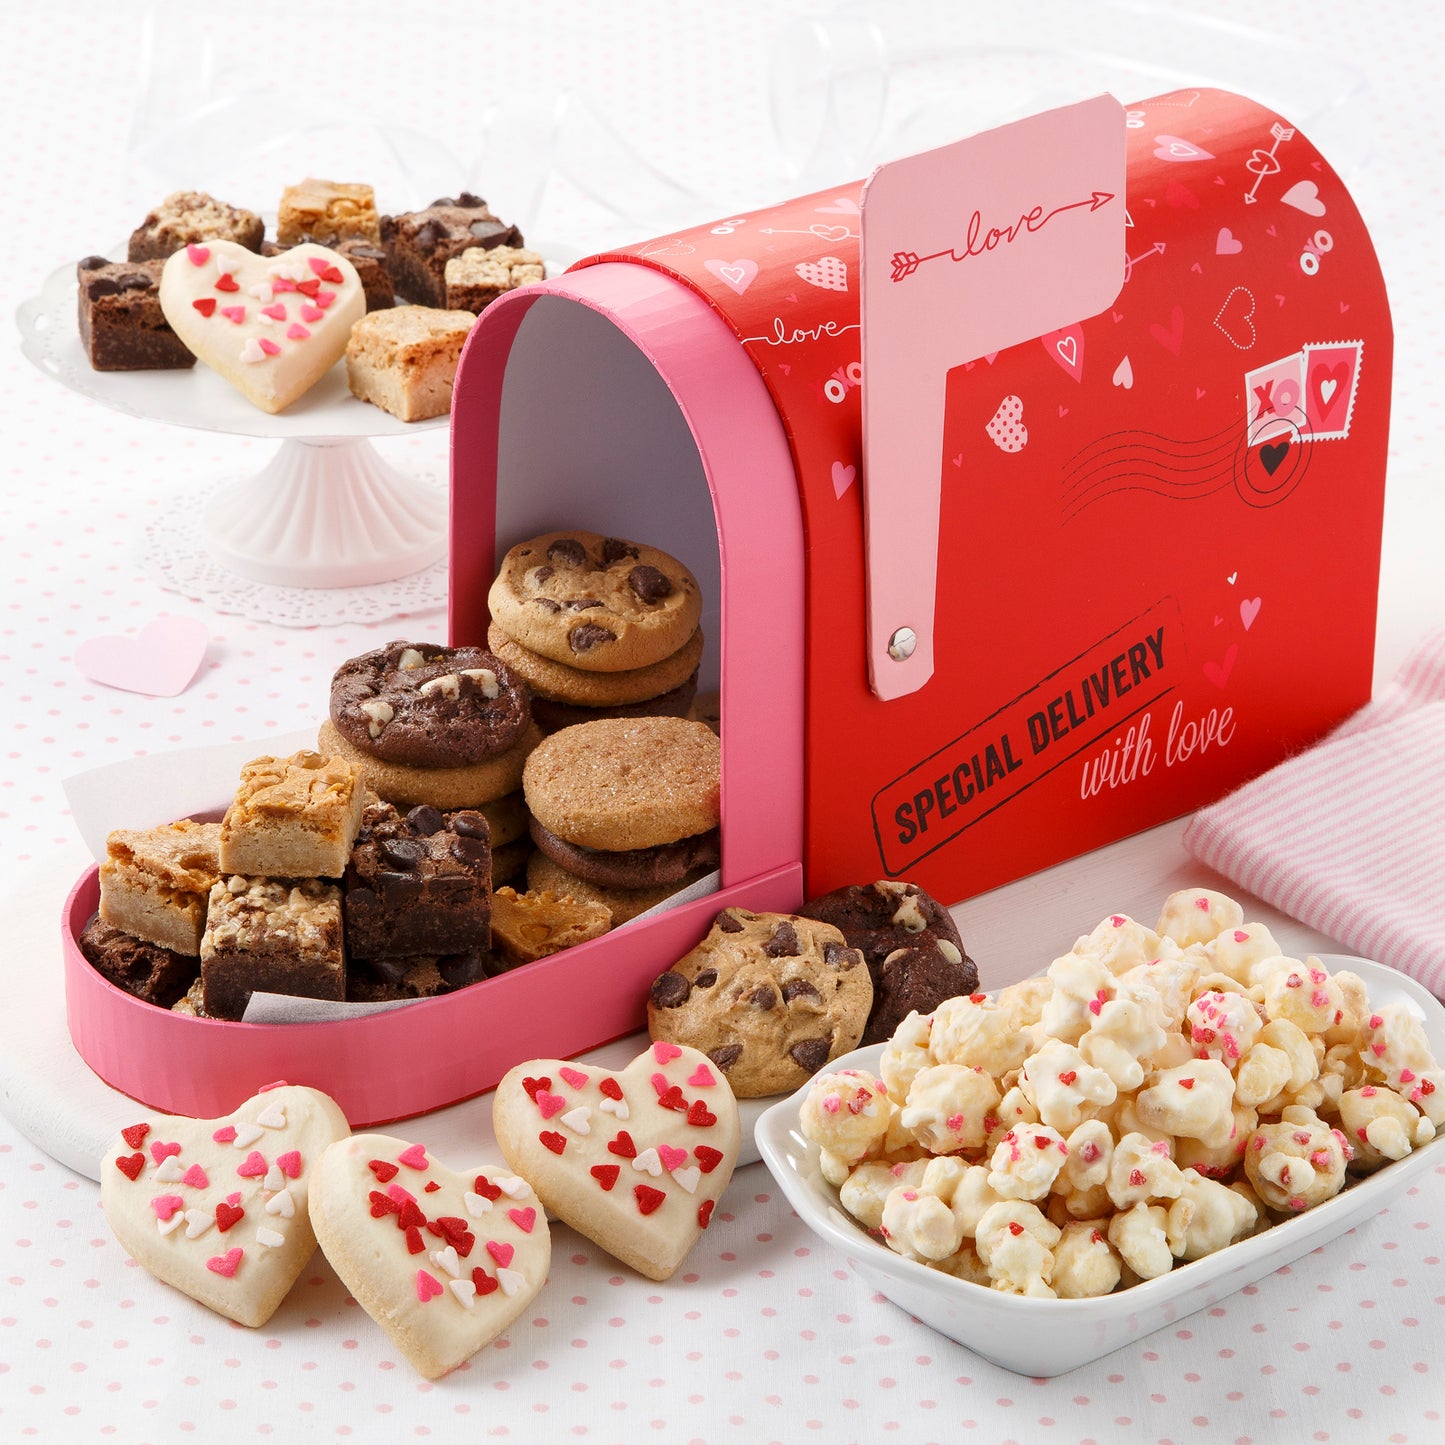 A mailbox themed for Valentine's Day gift box and filled with an assortment of Nibblers, brownie bites, 4 frosted mini heart cookies, and popcorn